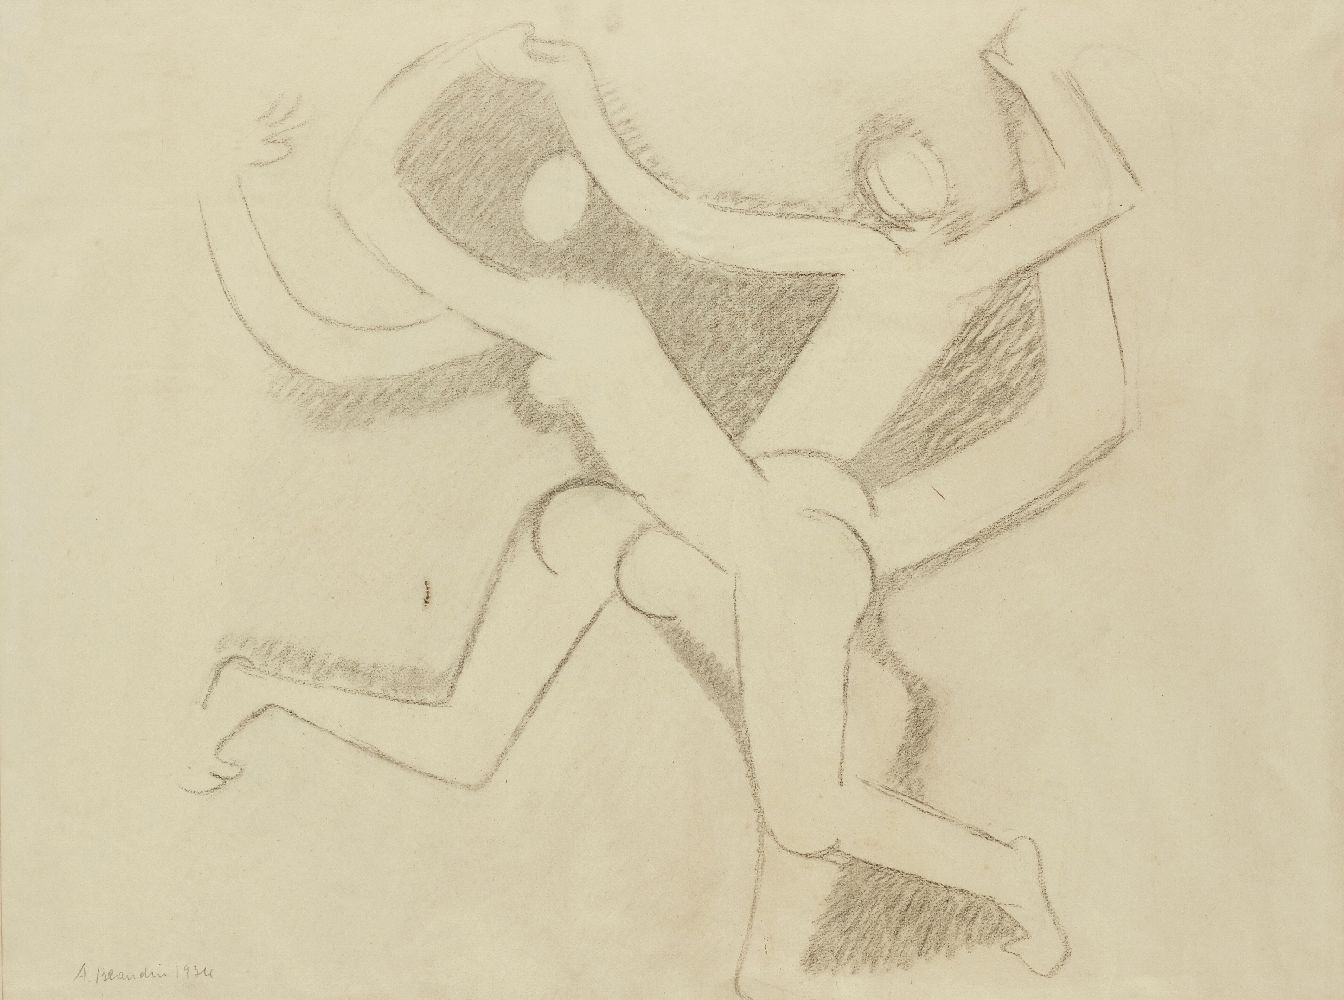 André Beaudin, French 1895-1979- Composition of Figures, 1934; charcoal, signed and dated 1934 lower